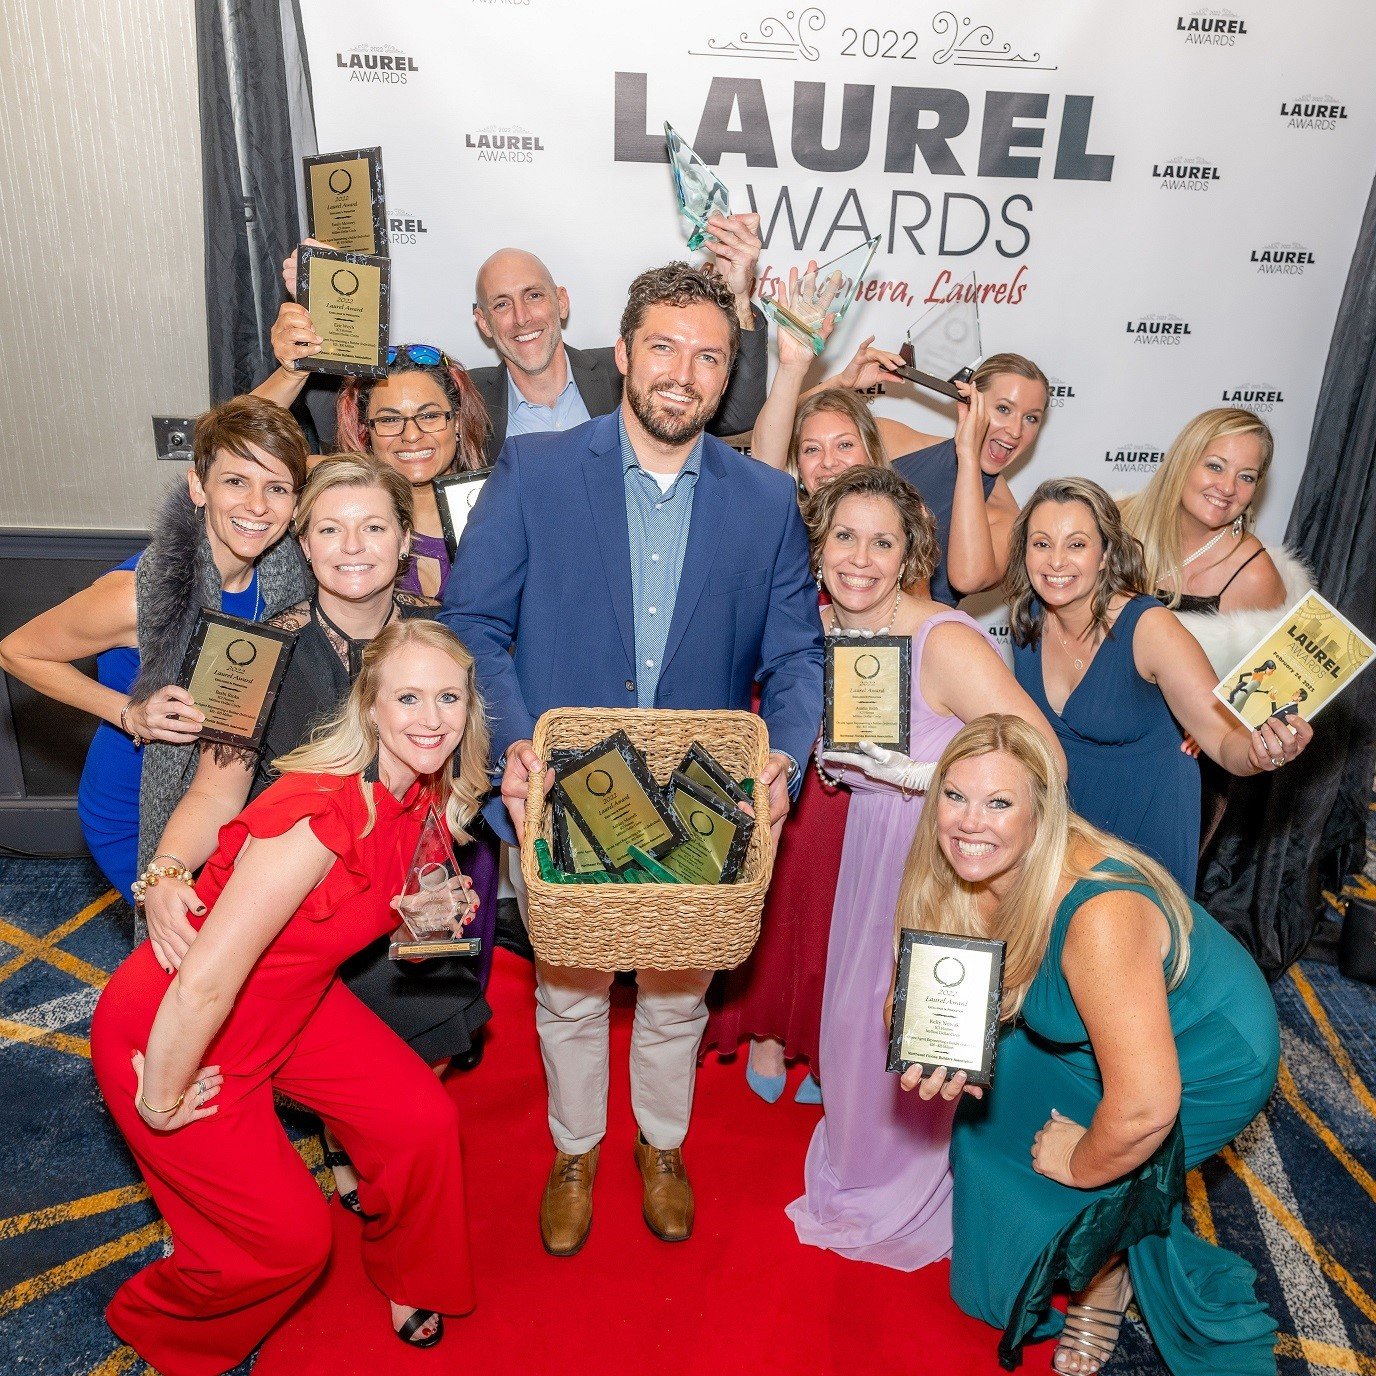 The ICI Homes team at the Laurel Awards competition. The company and its sales associates earned 23 awards including the Grand Laurel Award.